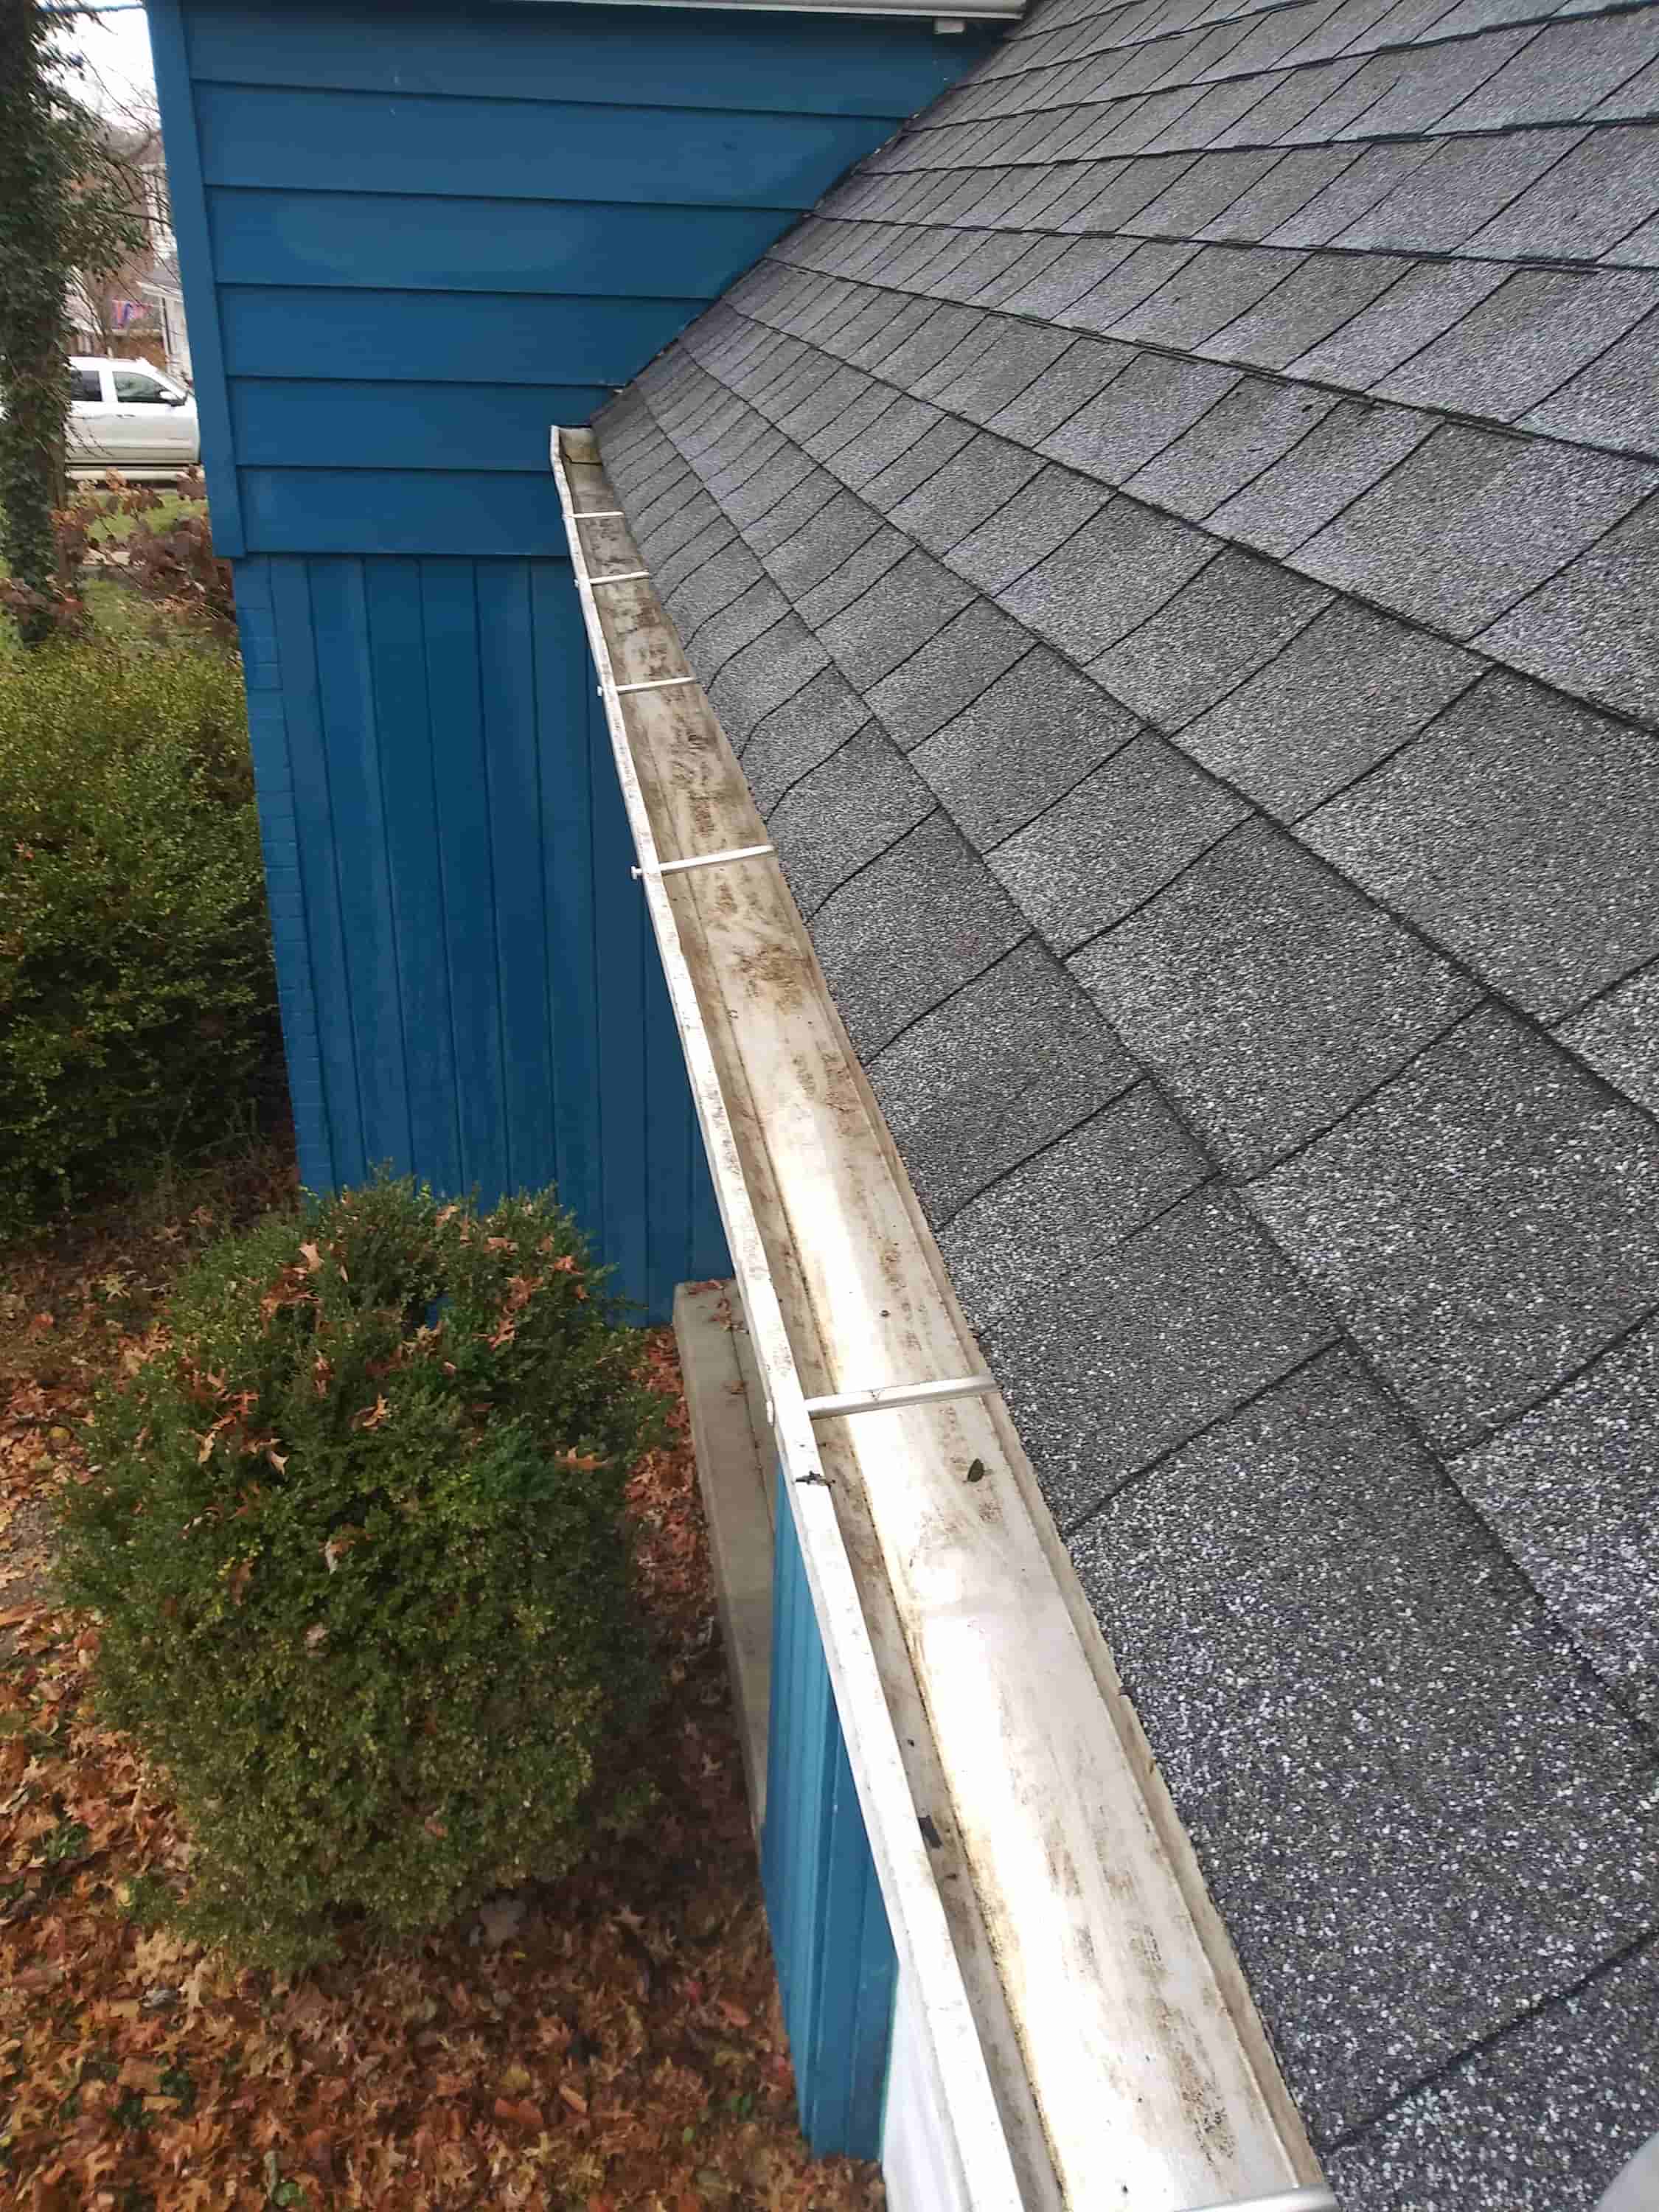 why gutter cleaning is important